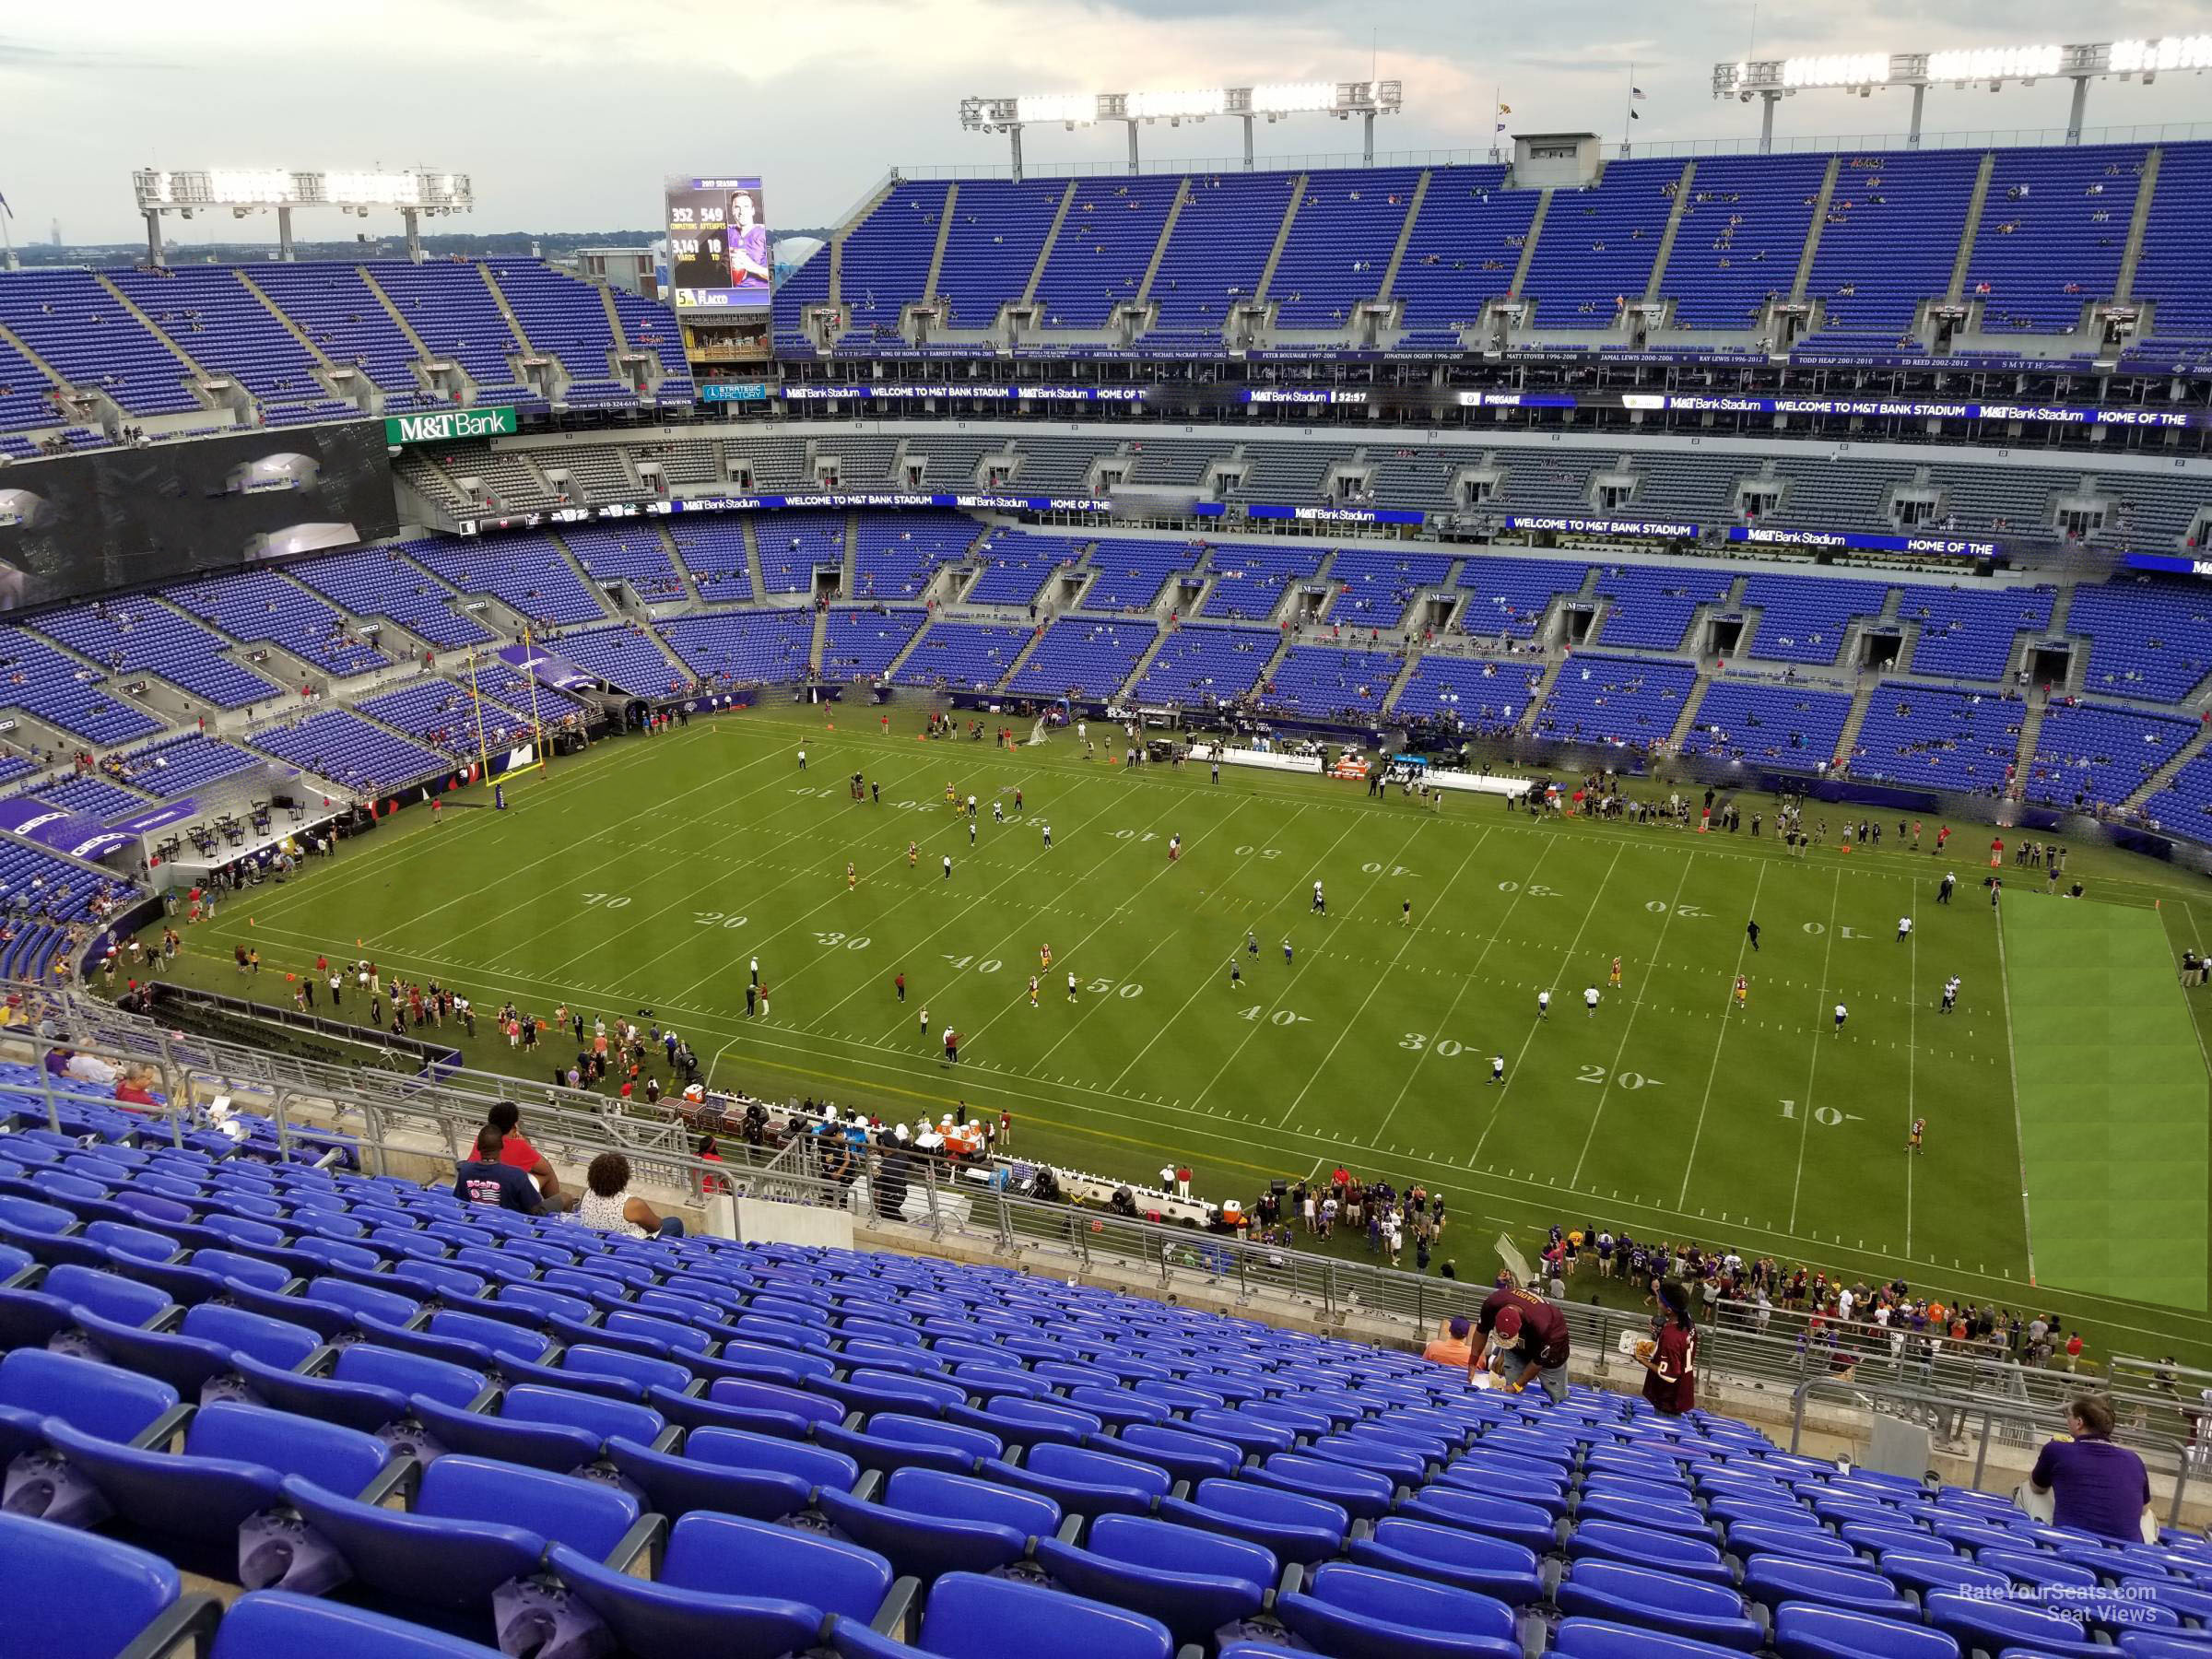 section 551, row 20 seat view  for football - m&t bank stadium